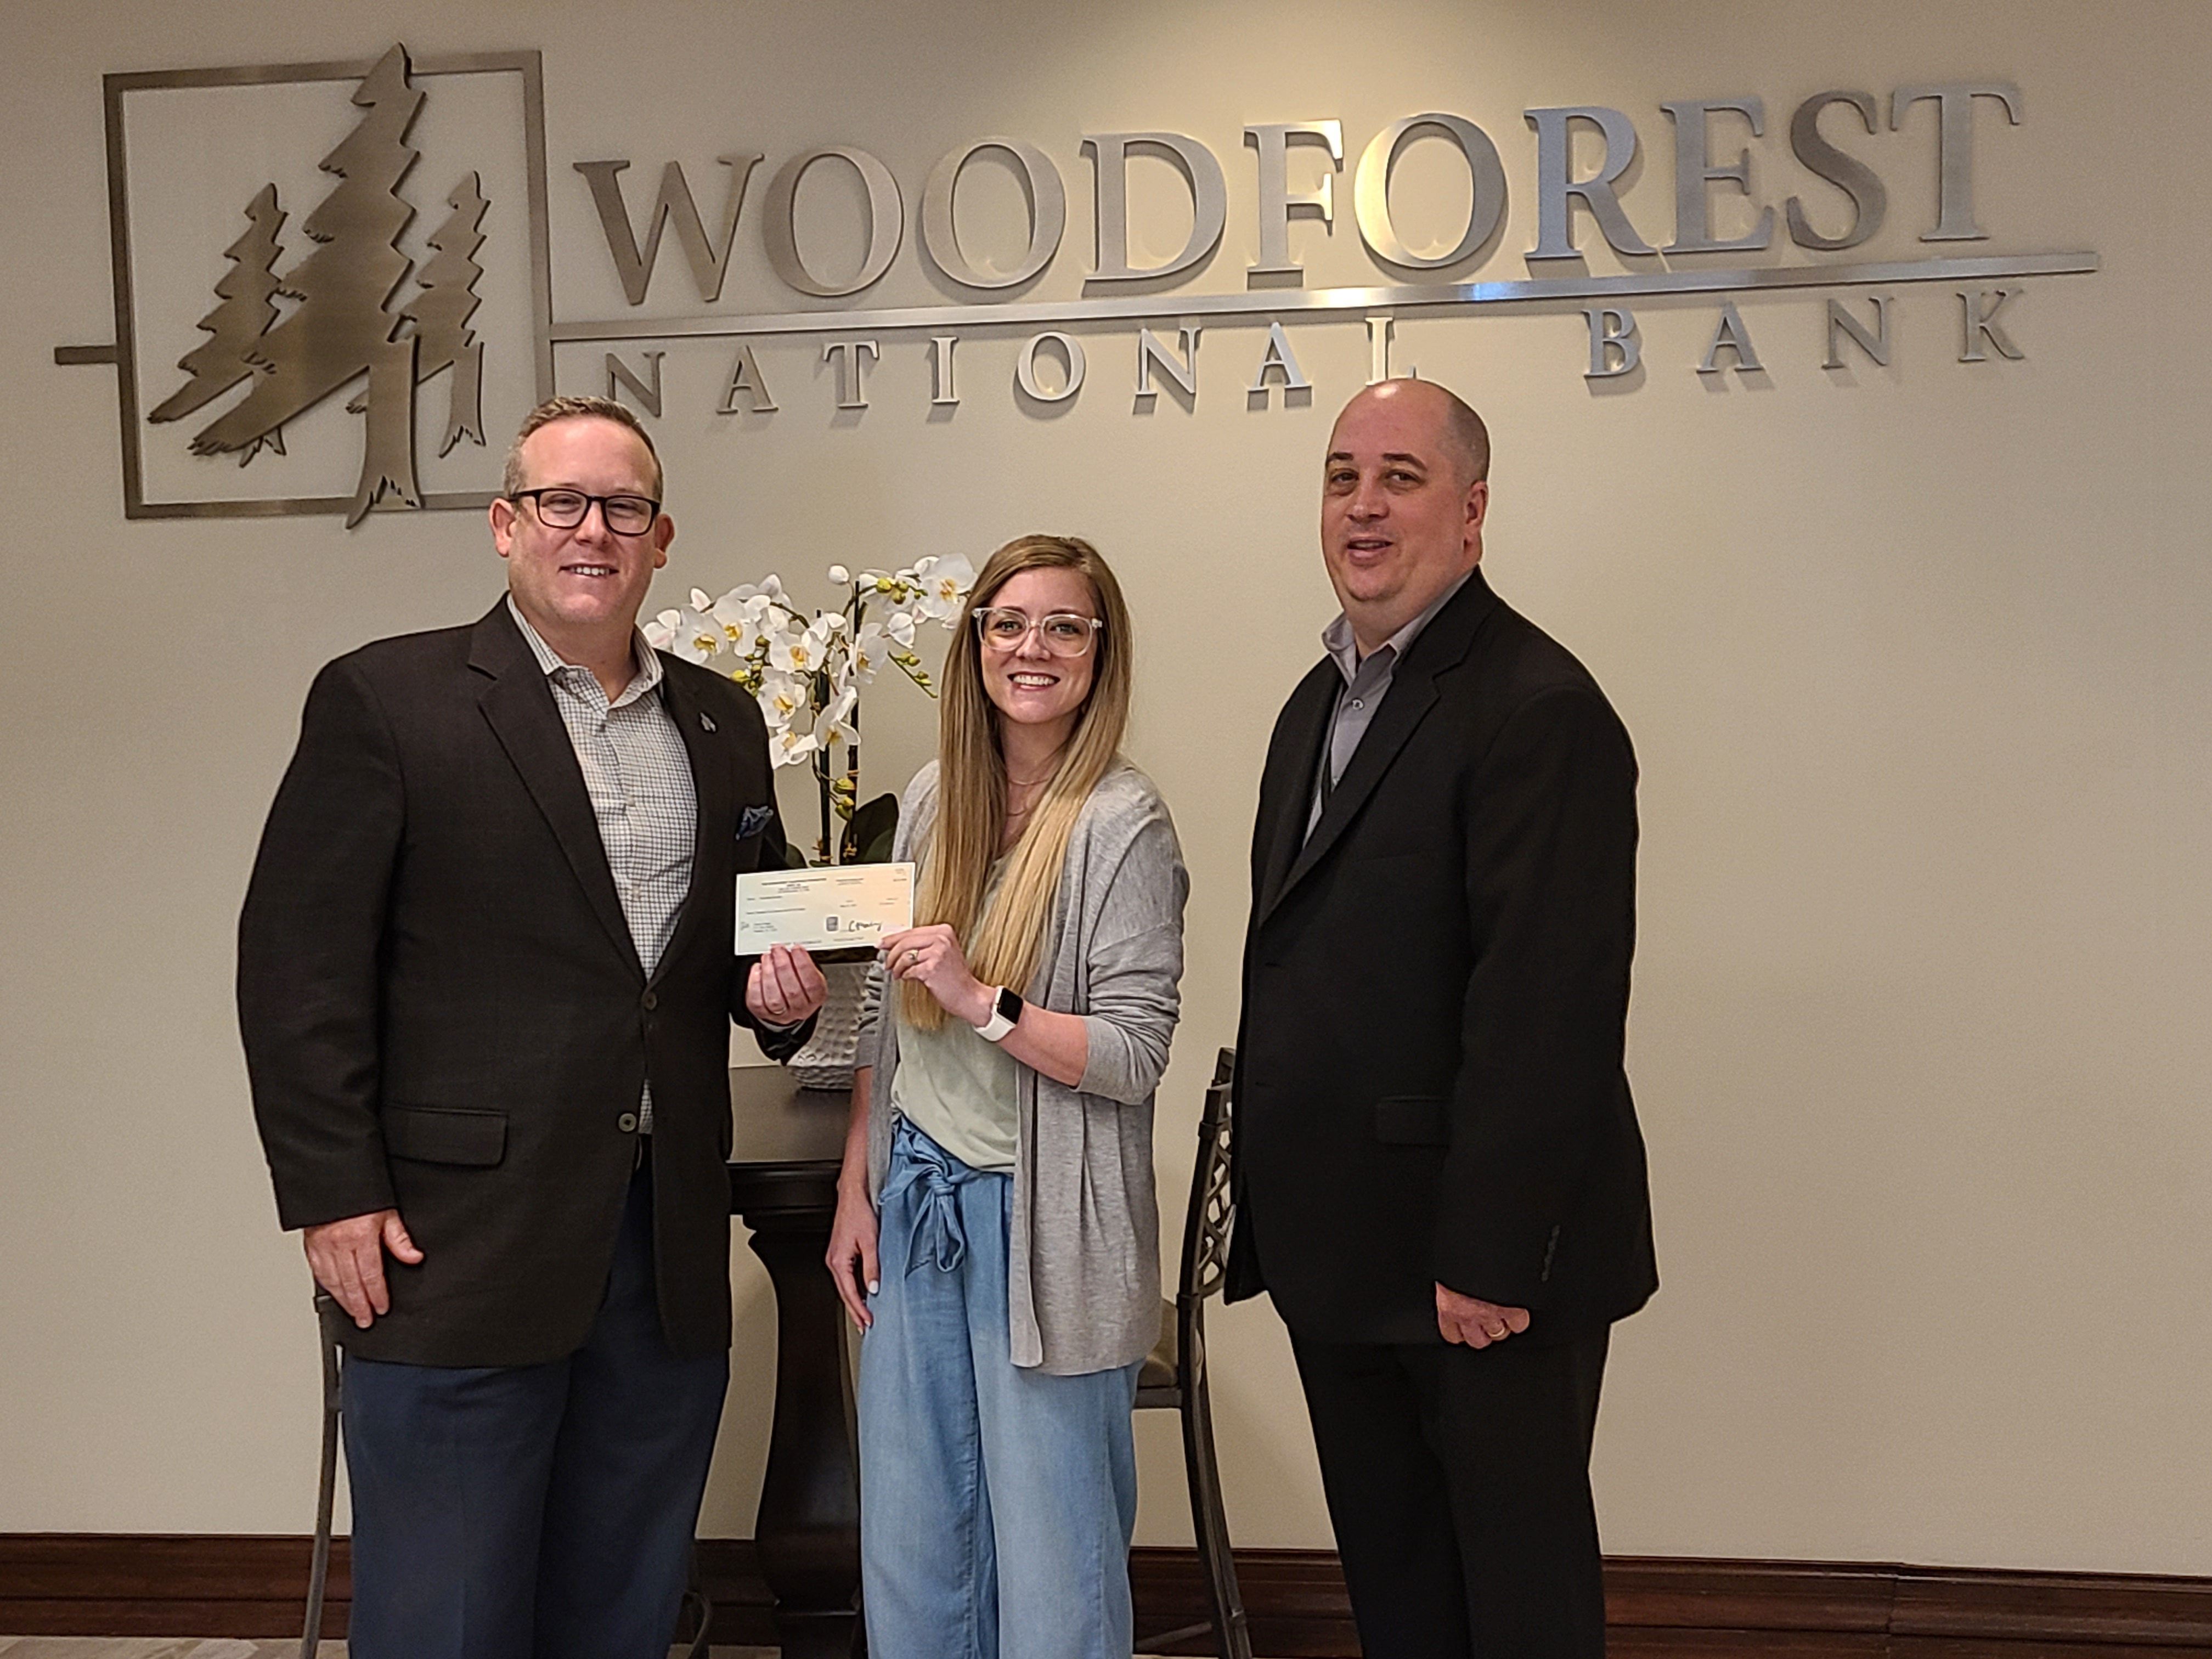 Home of Hope recently received a $12,500.00 donation from The Woodforest Charitable Foundation.